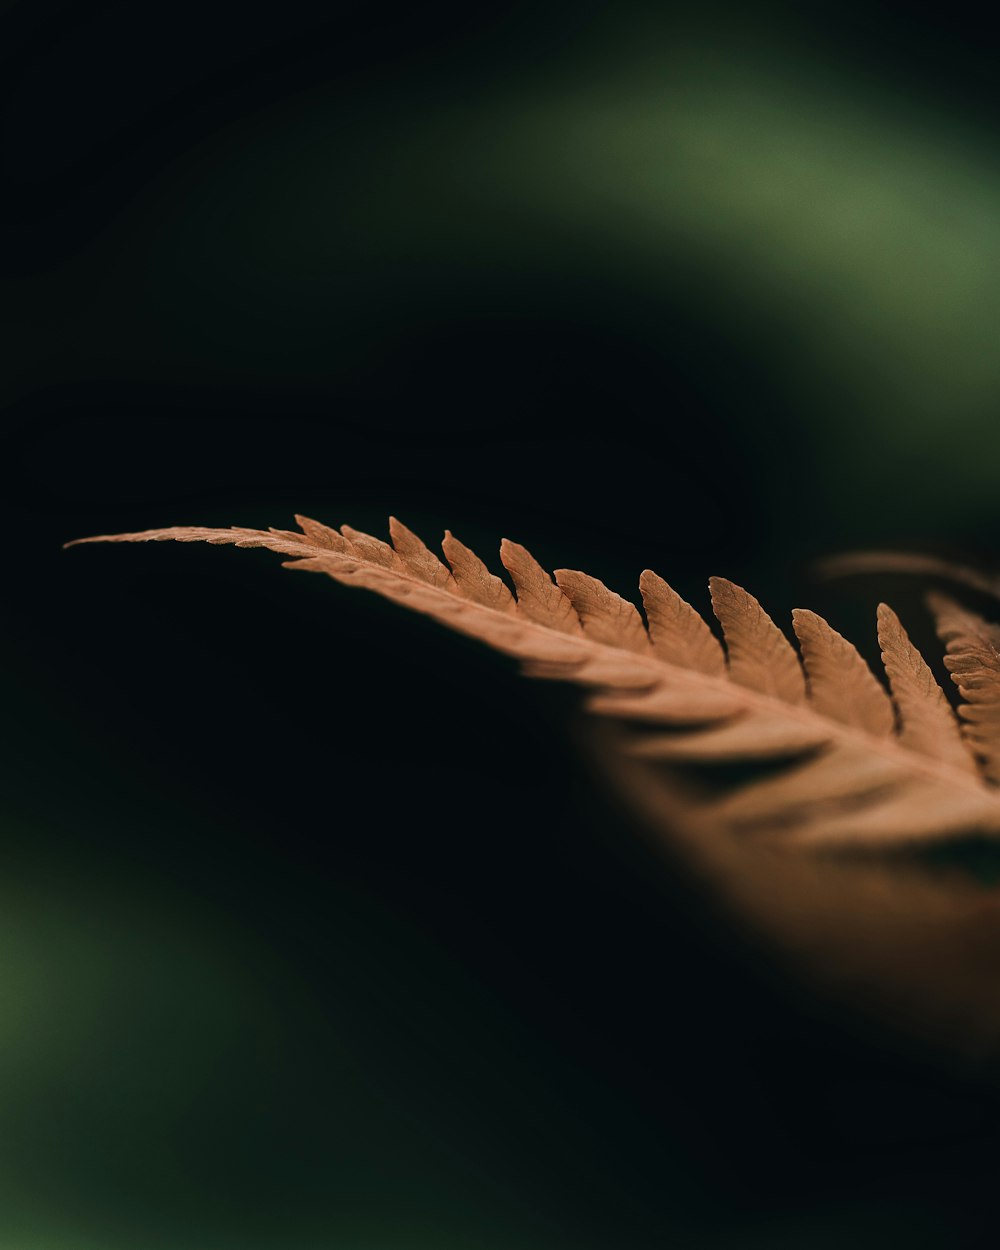 a close up of a leaf on a black background